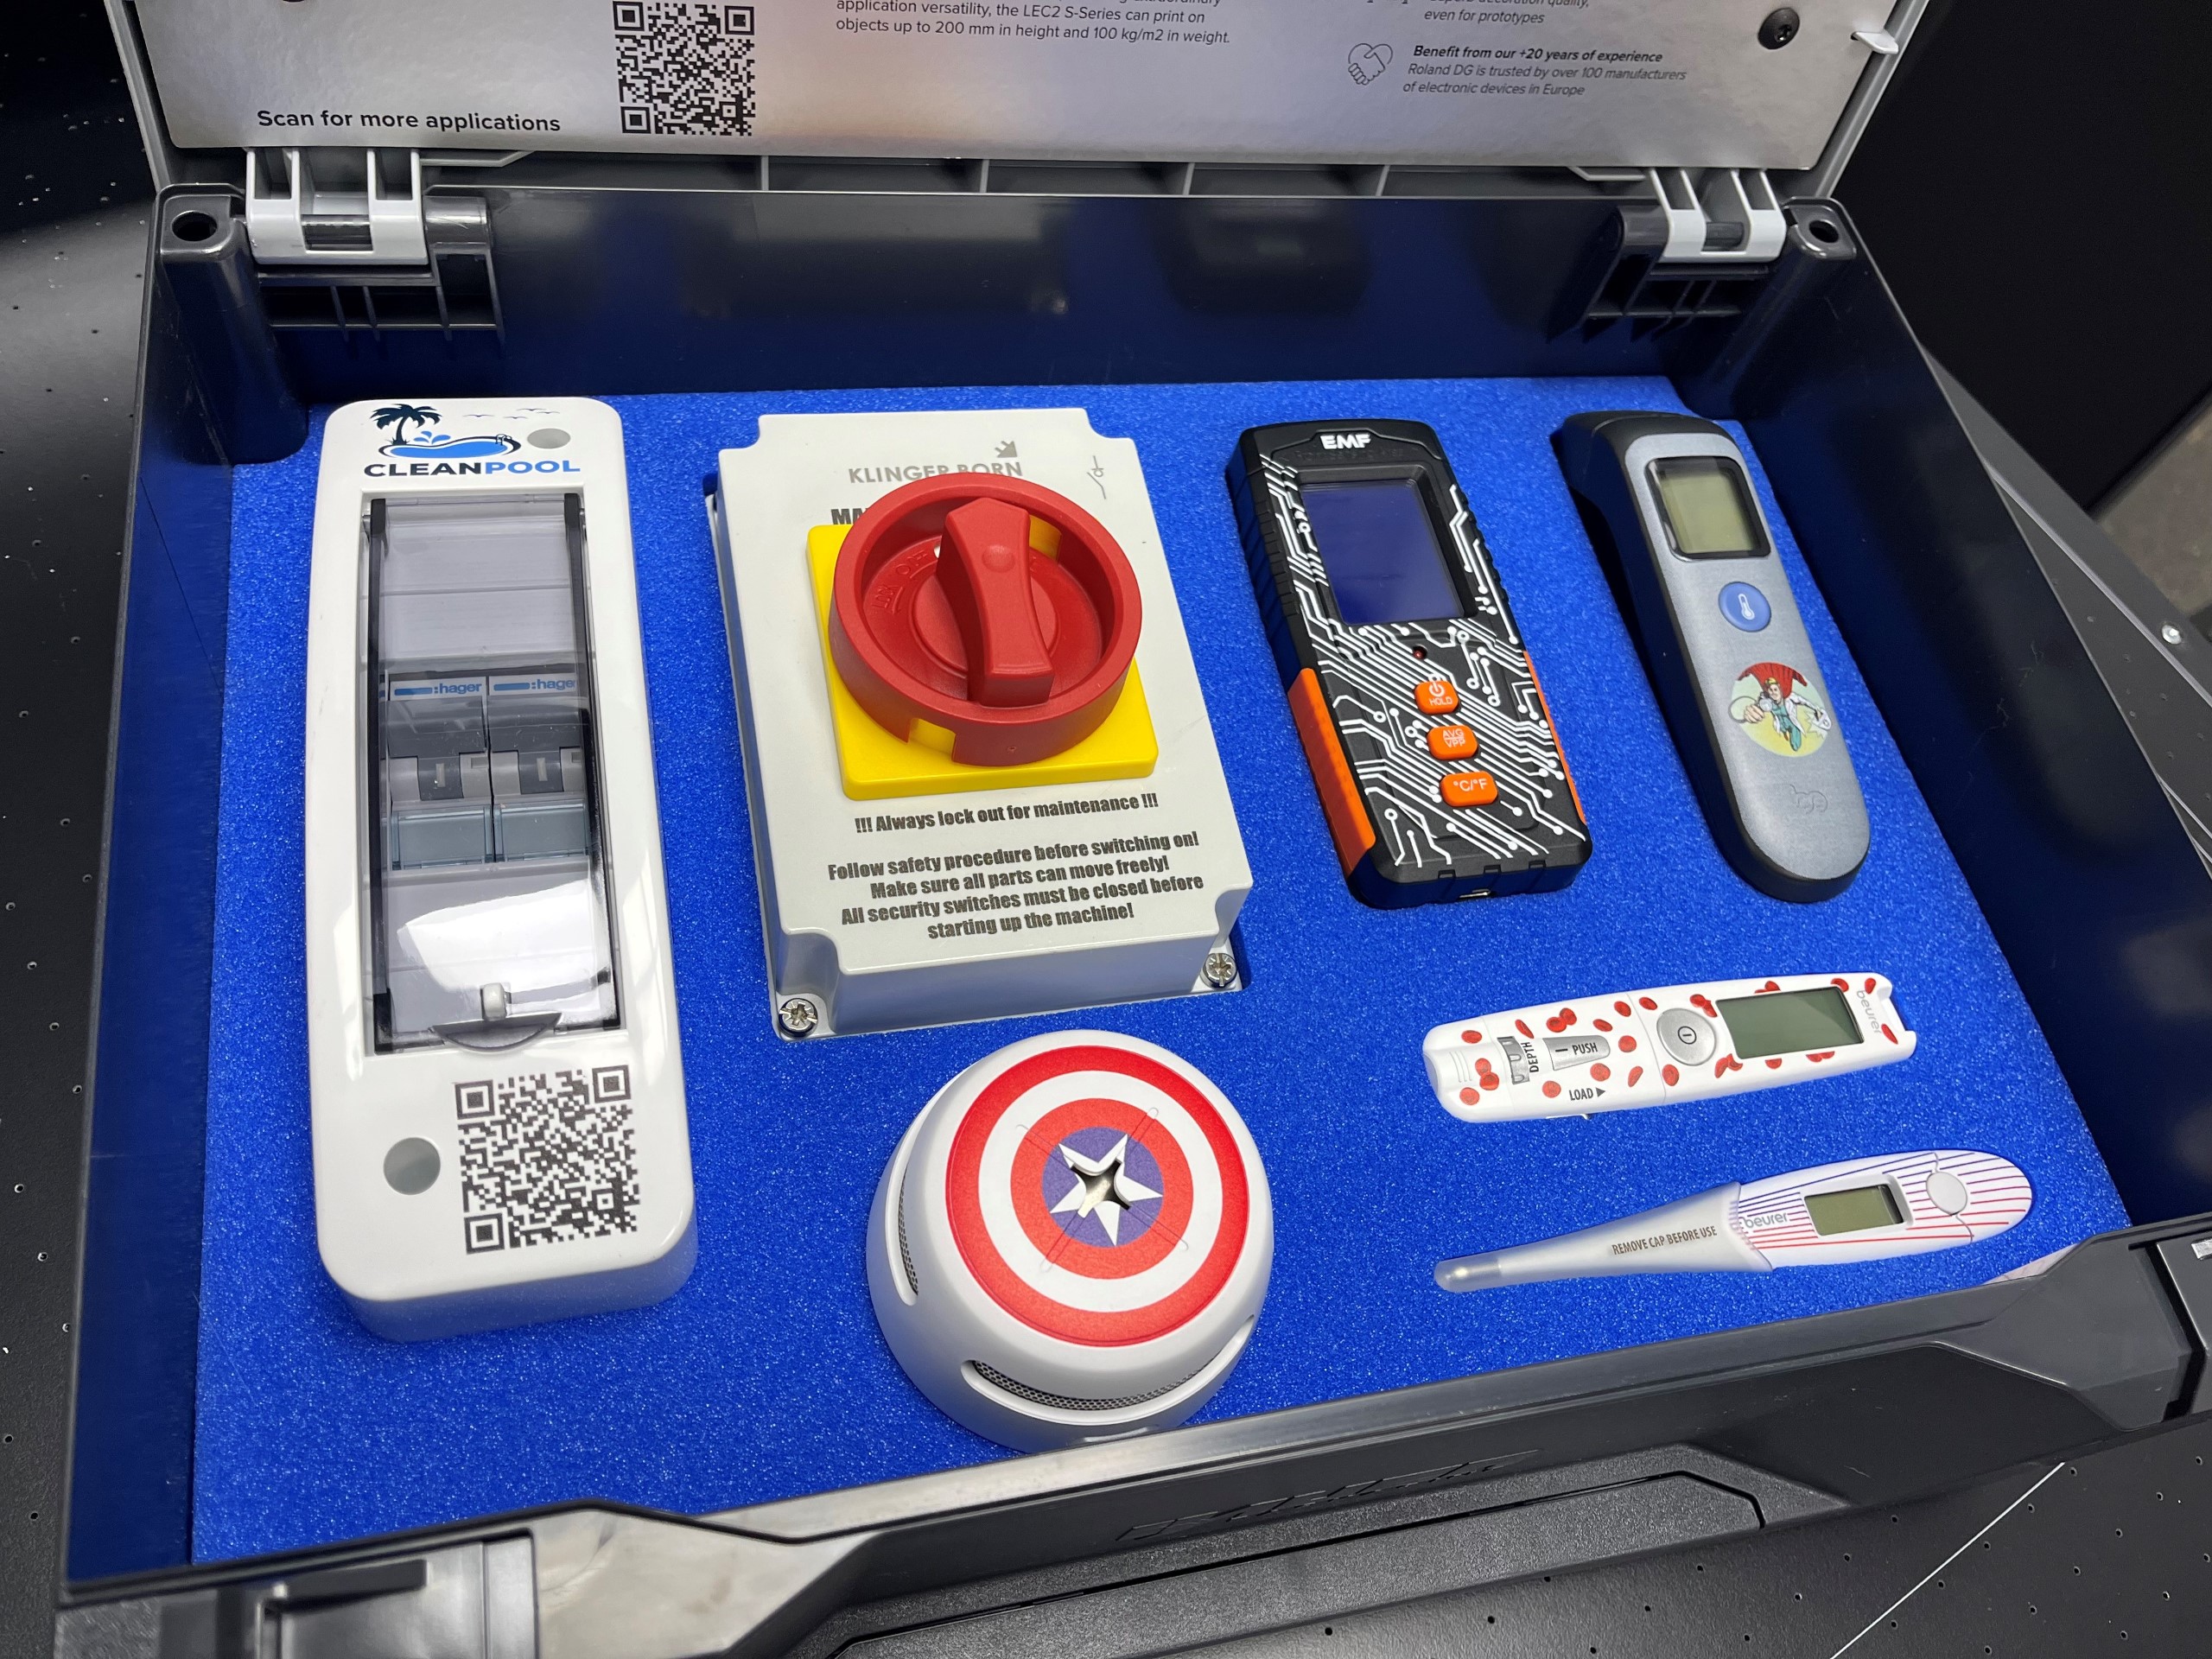 A case containing customised electronics